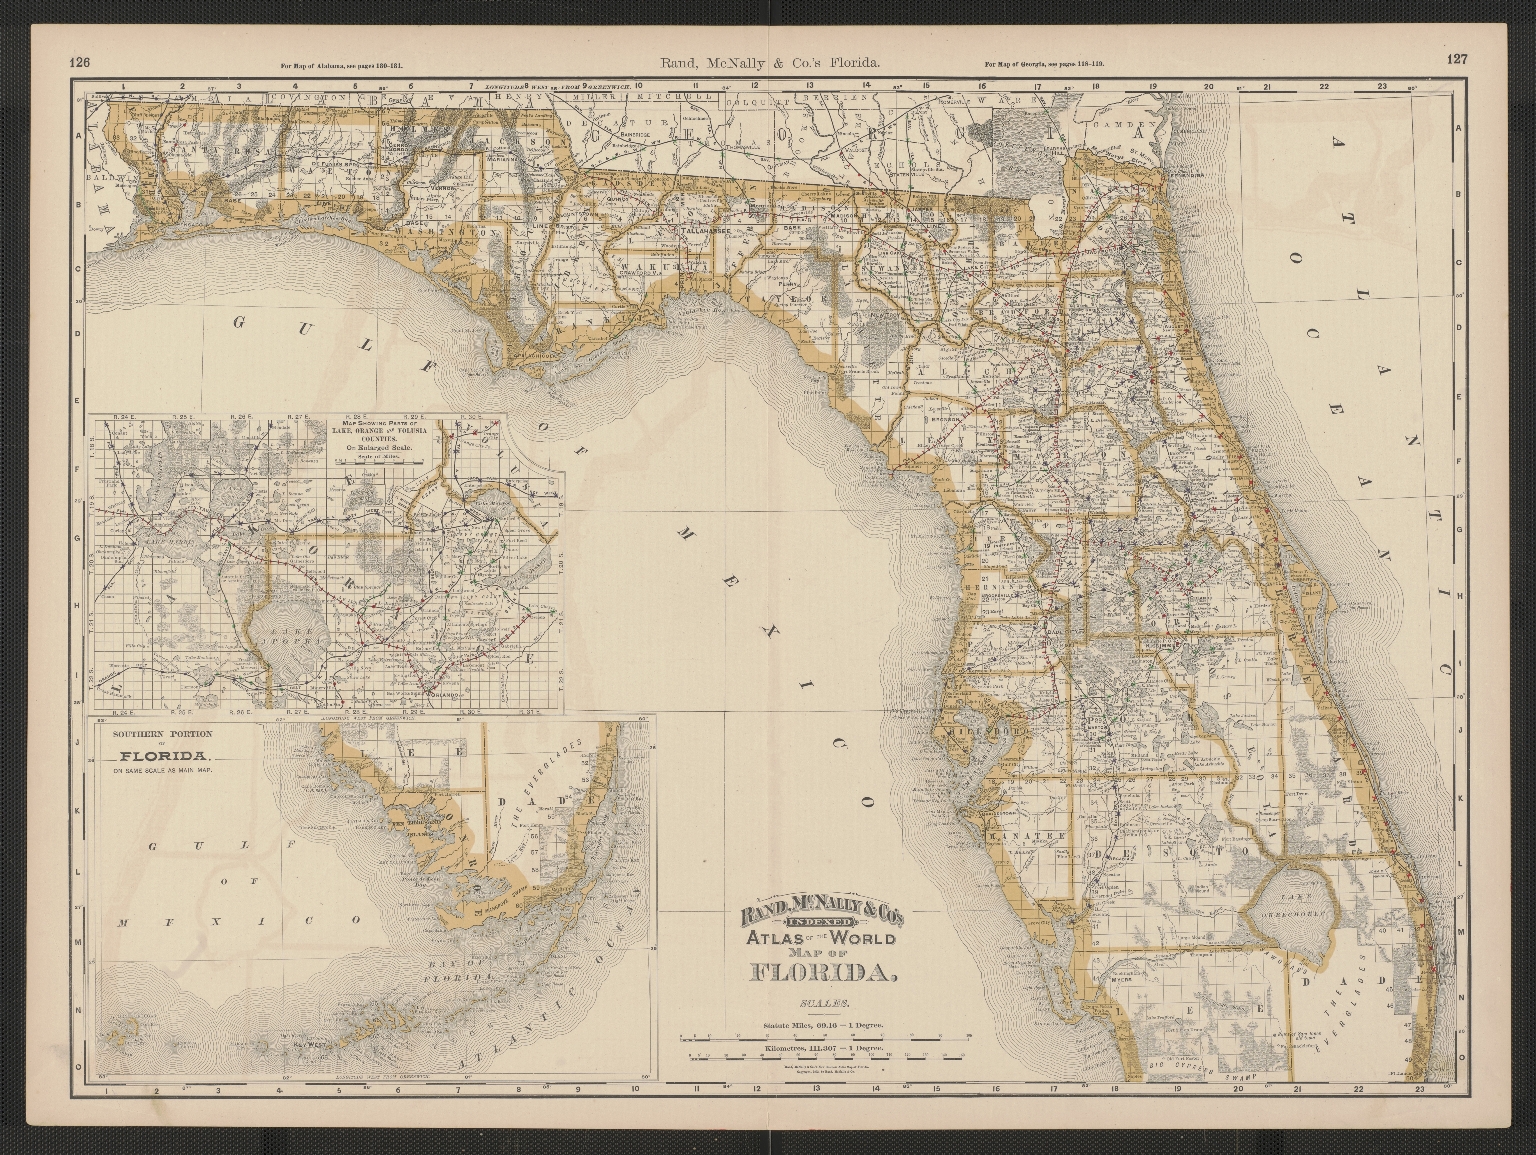 Rand, McNally & Co.'s indexed atlas of the world map of Florida.